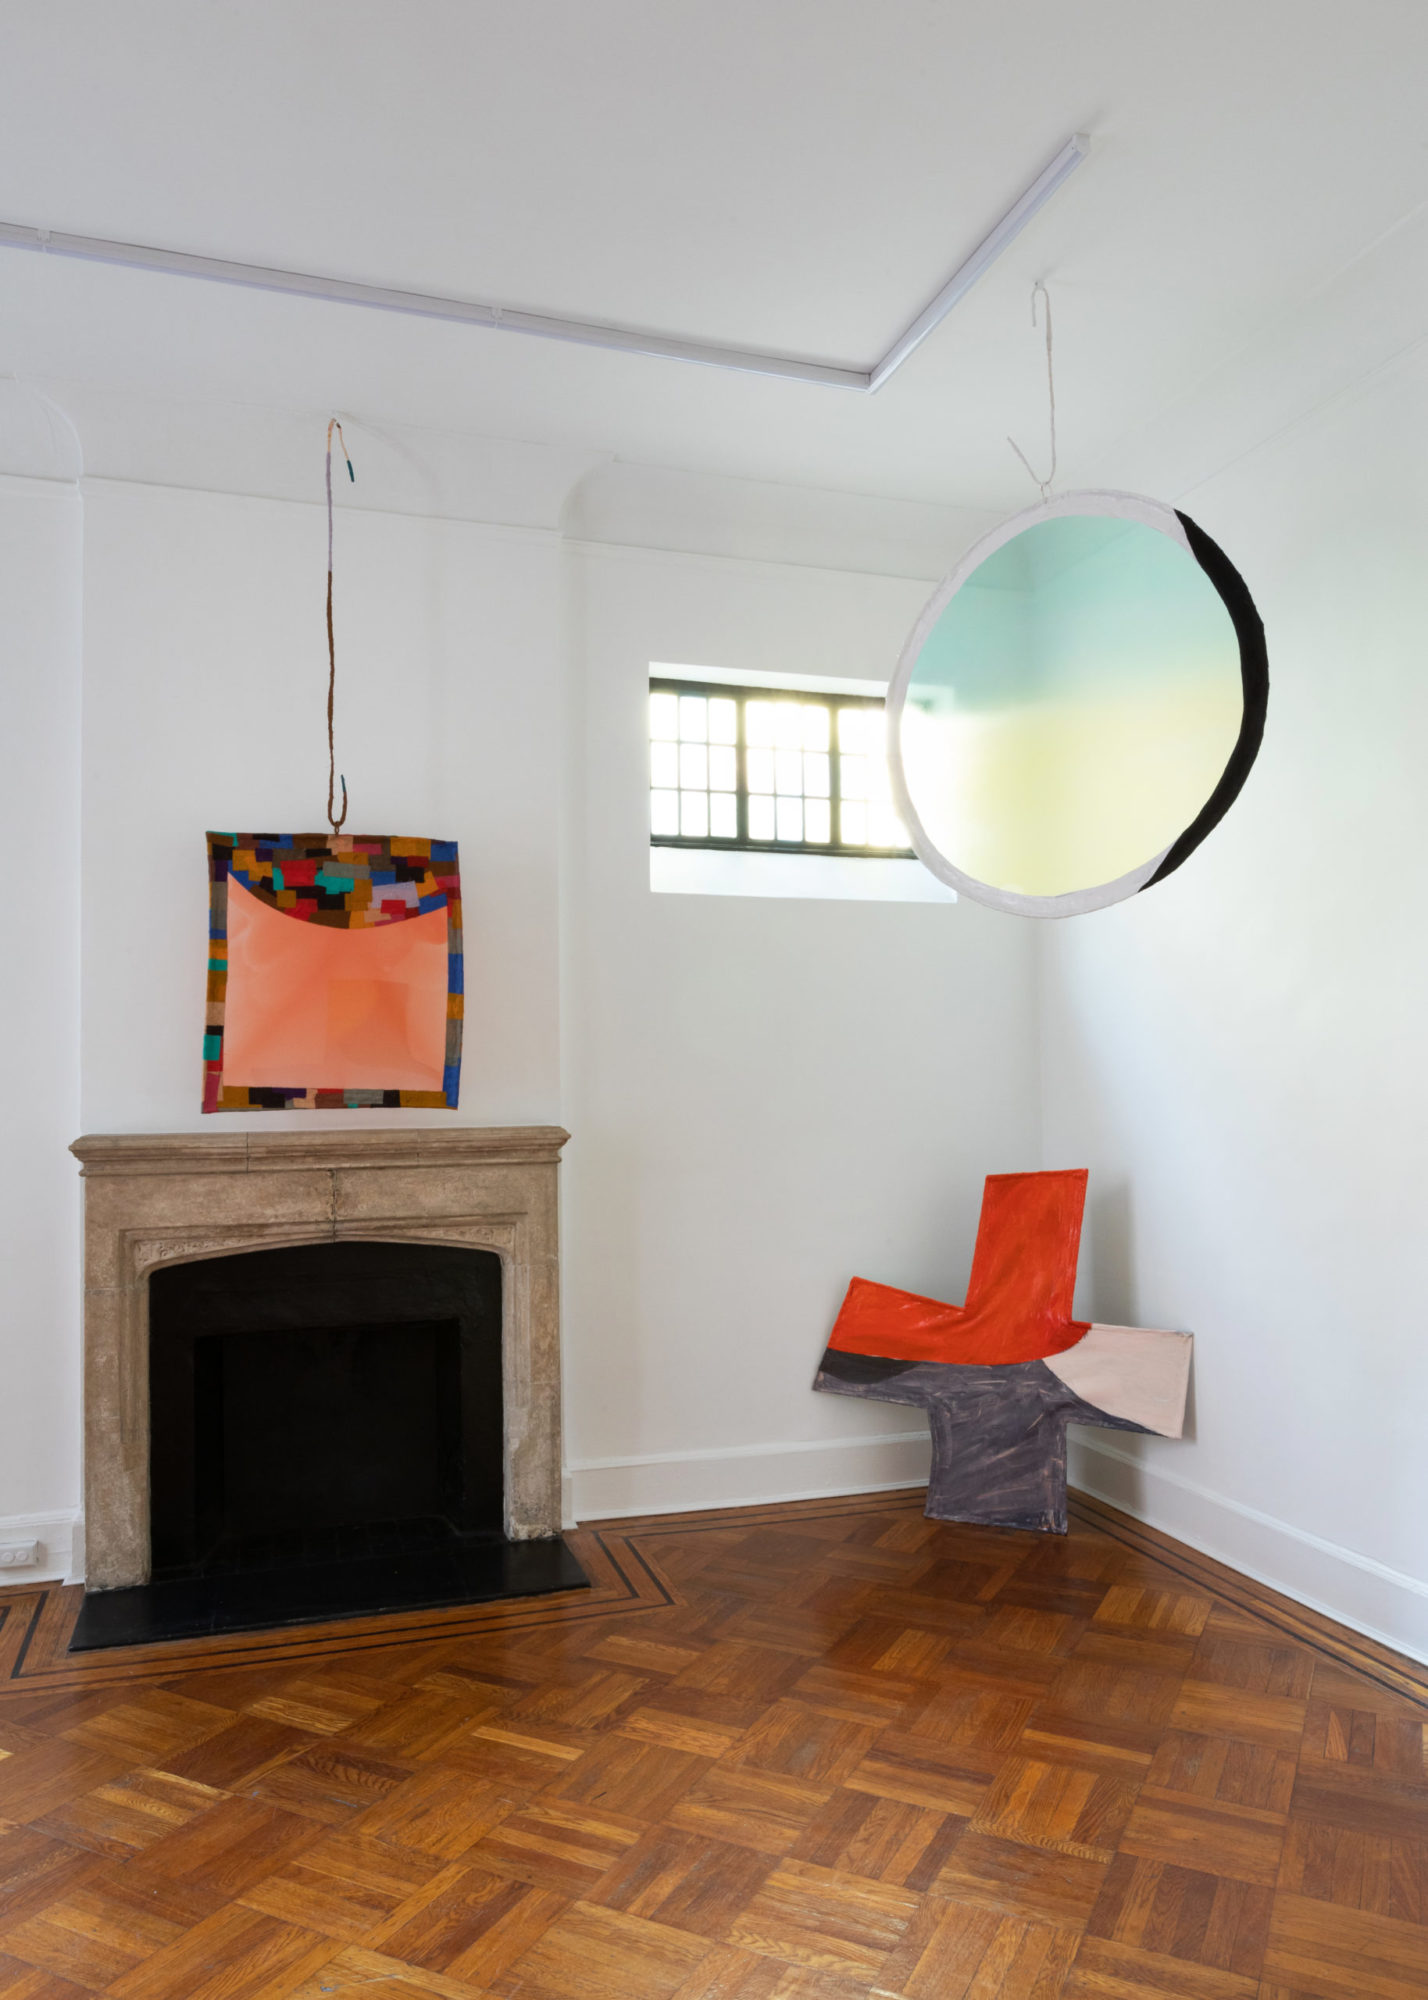 An installation view of Fabienne Lasserre's exhibition at TURN GALLERY in New York. Two pieces are hanging from the ceiling in a brightly lit room and one is propped against the wall.